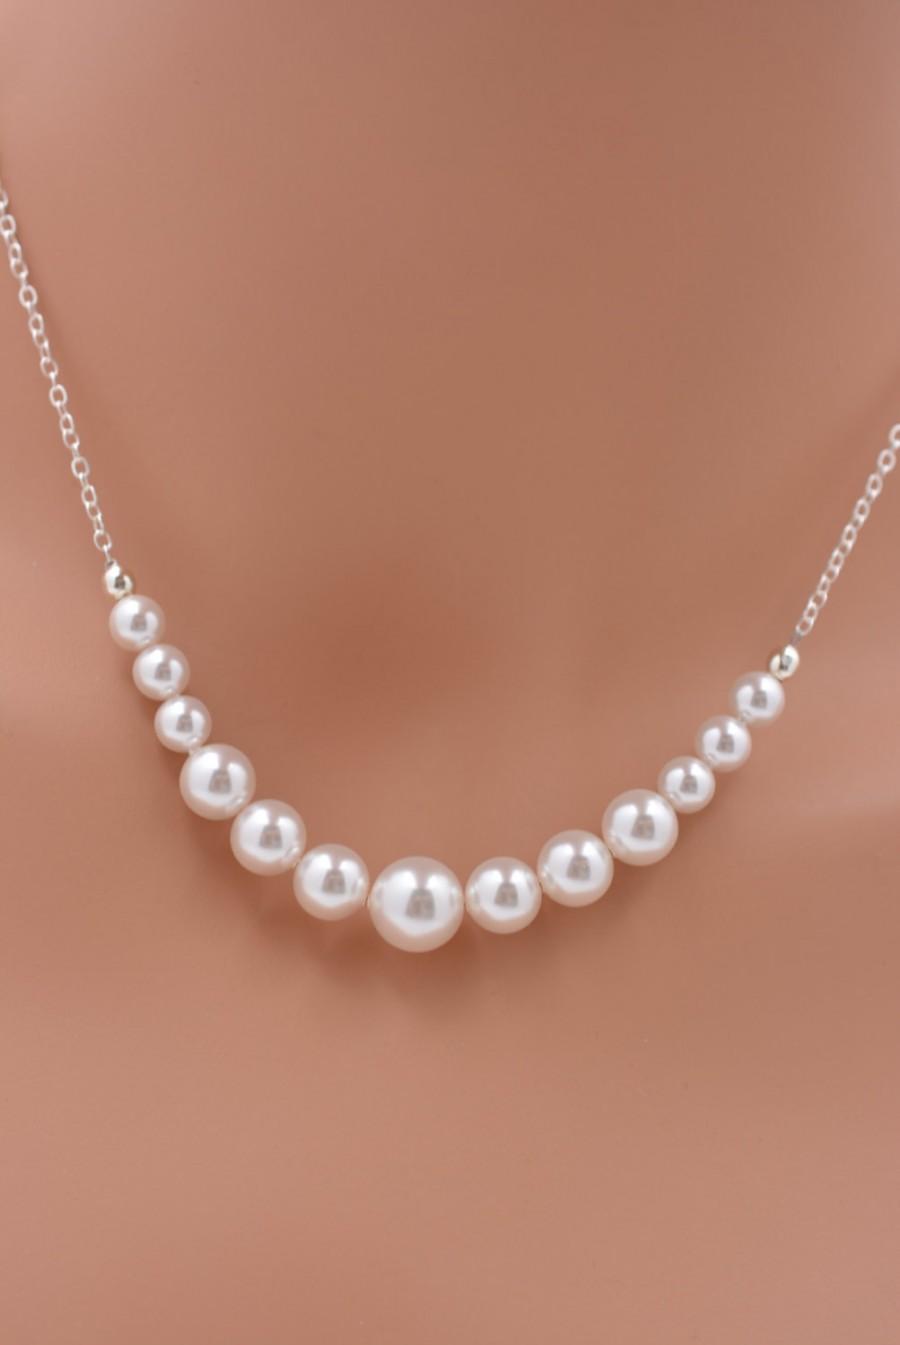 Mariage - Set of 6 Bridesmaid Pearl Necklaces, Silver and Pearl Bridesmaid Necklaces, Pearl Backdrop Necklace 925 Sterling Silver Necklace 0237